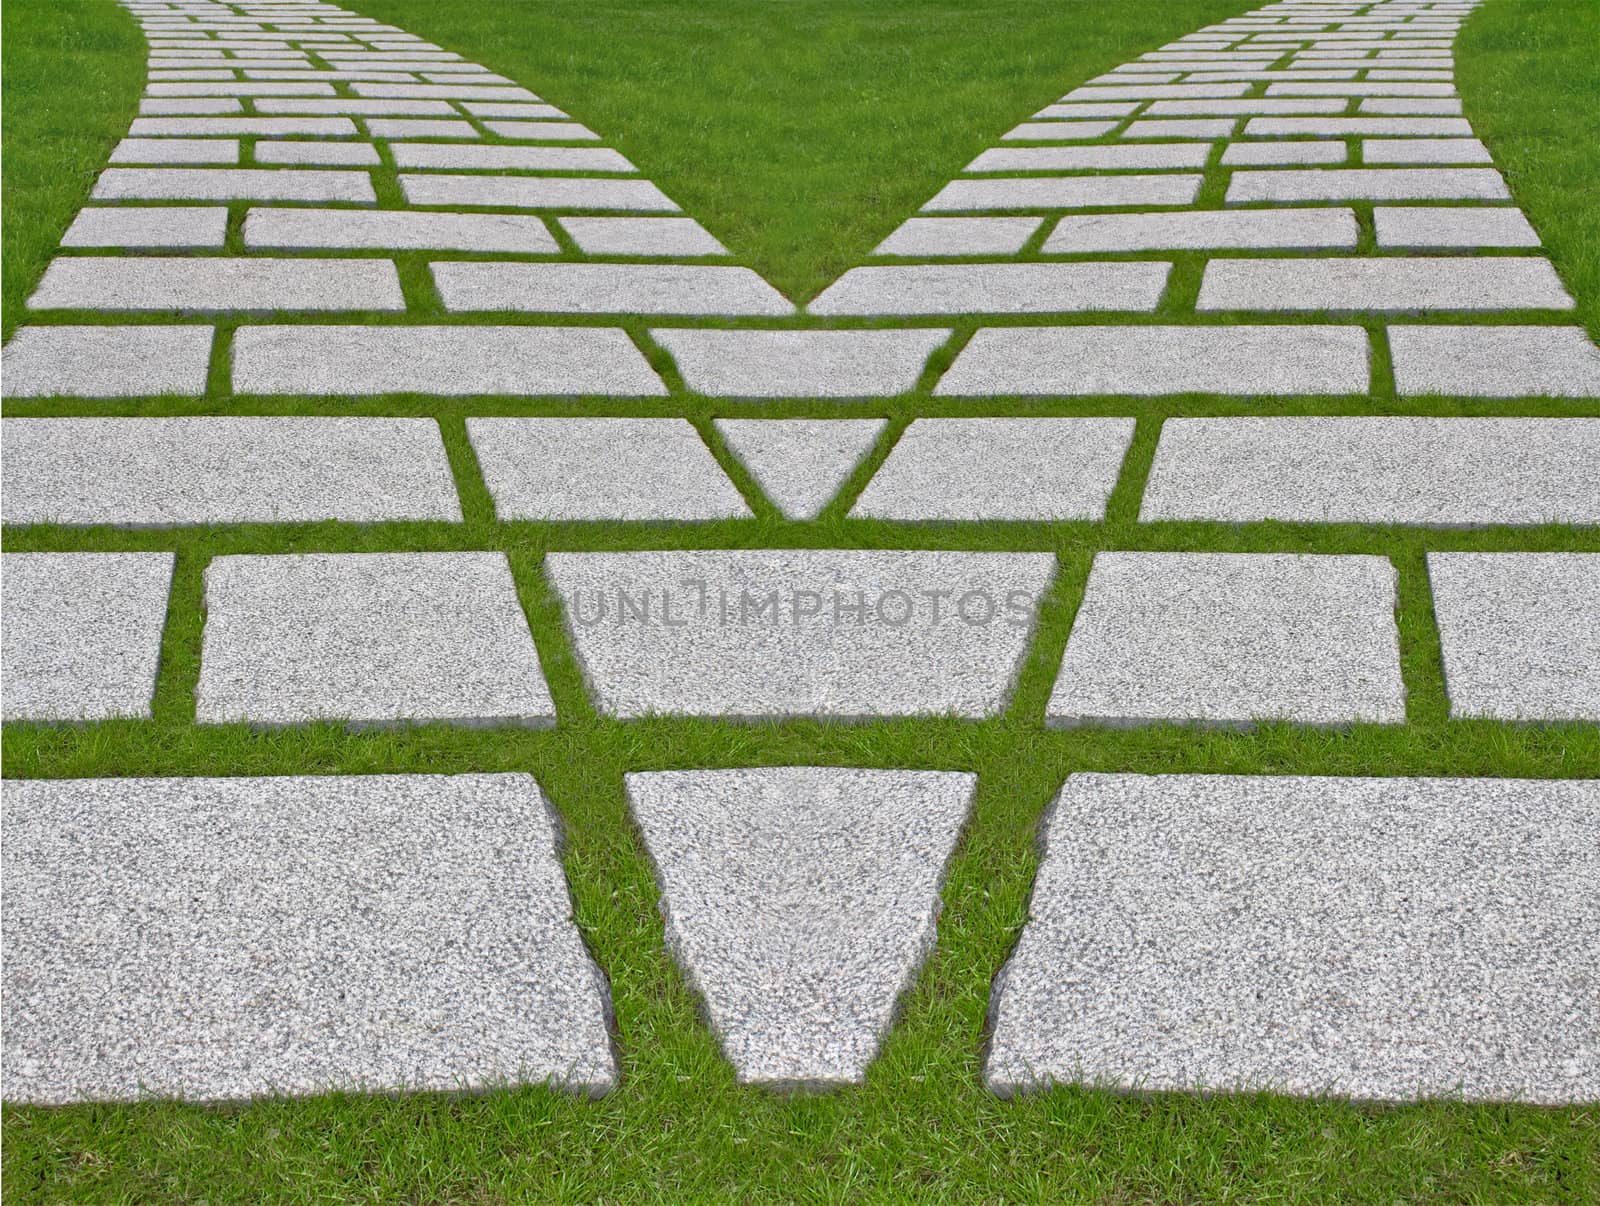 Way divergence. Granite plates on a green lawn.